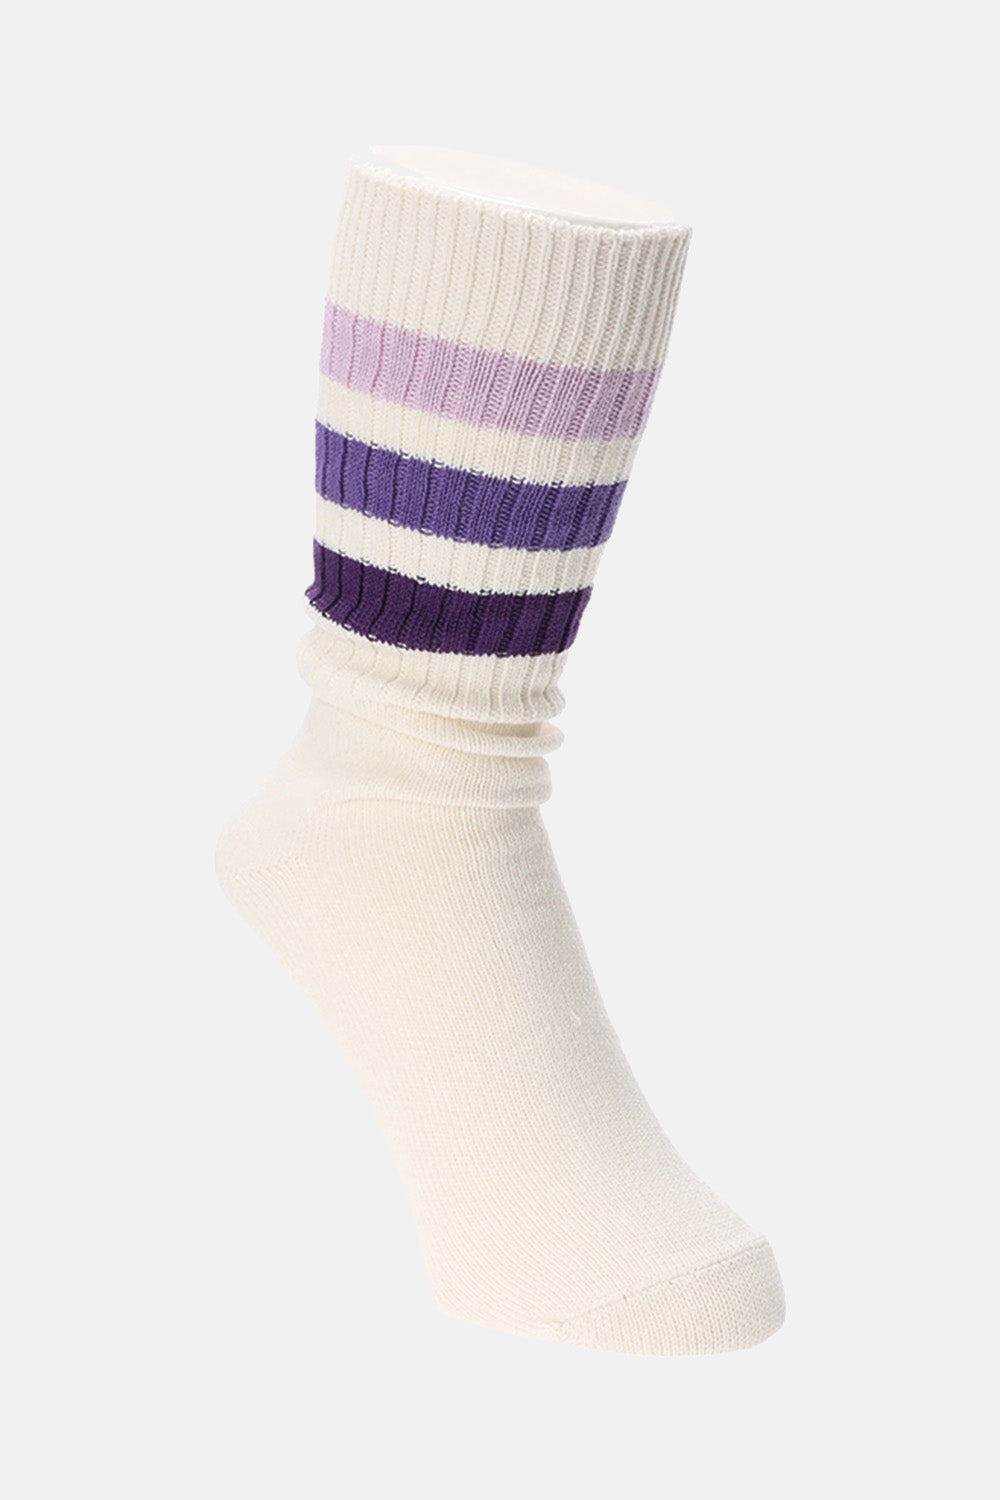 Anonymous Ism Recover™ Gradation 3 Line Crew (Purple / Lilac)